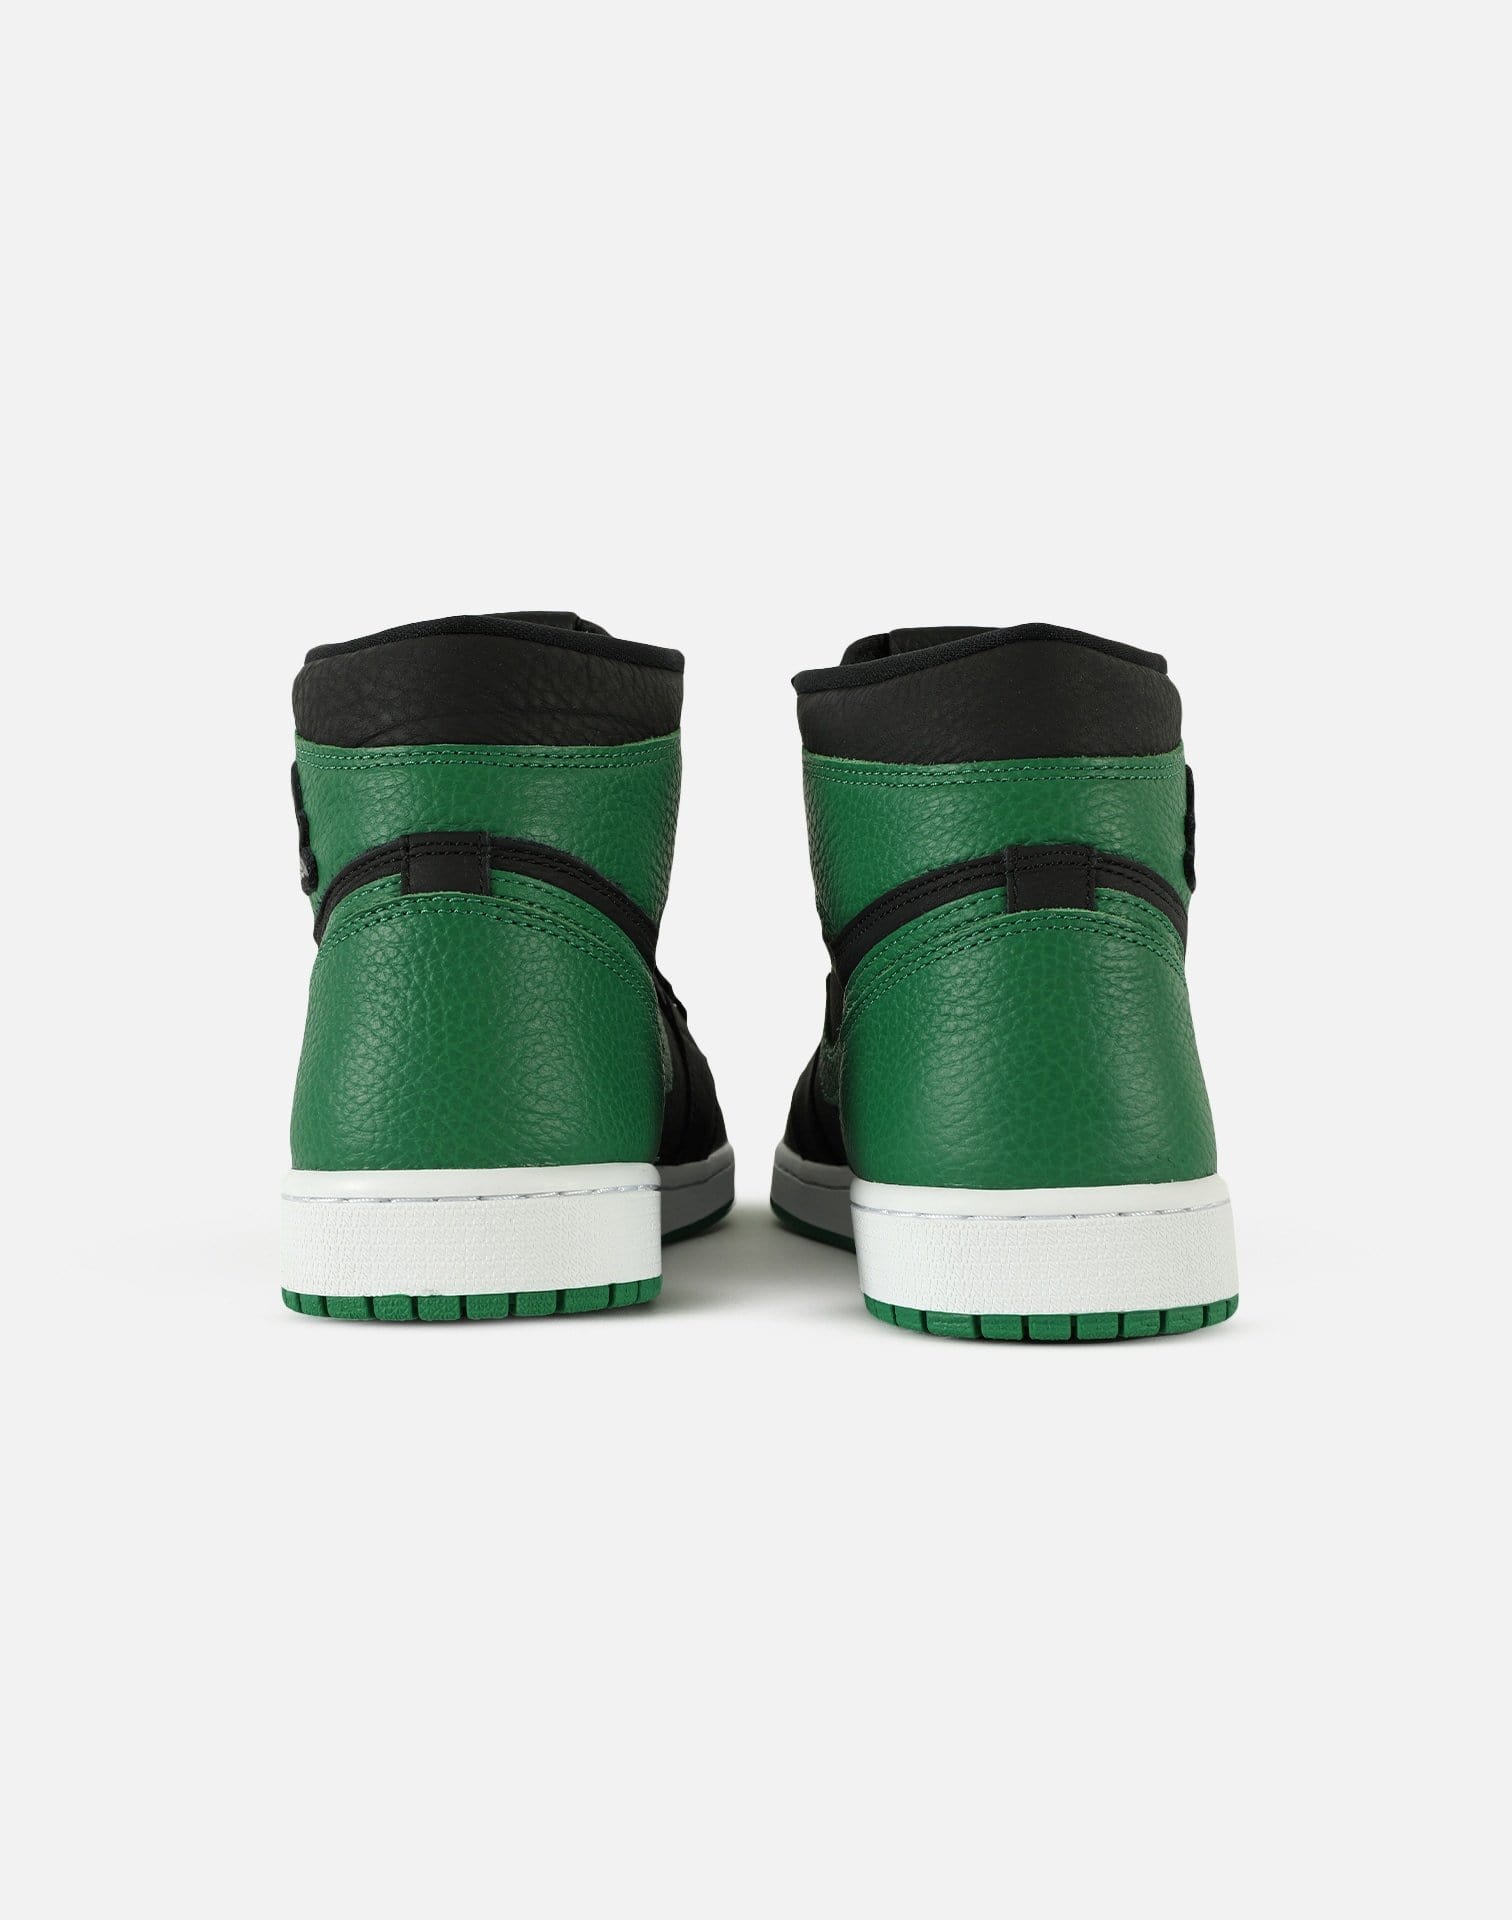 The Nike Dunk High Goes Green with Upcoming “Celtics” Colorway – DTLR